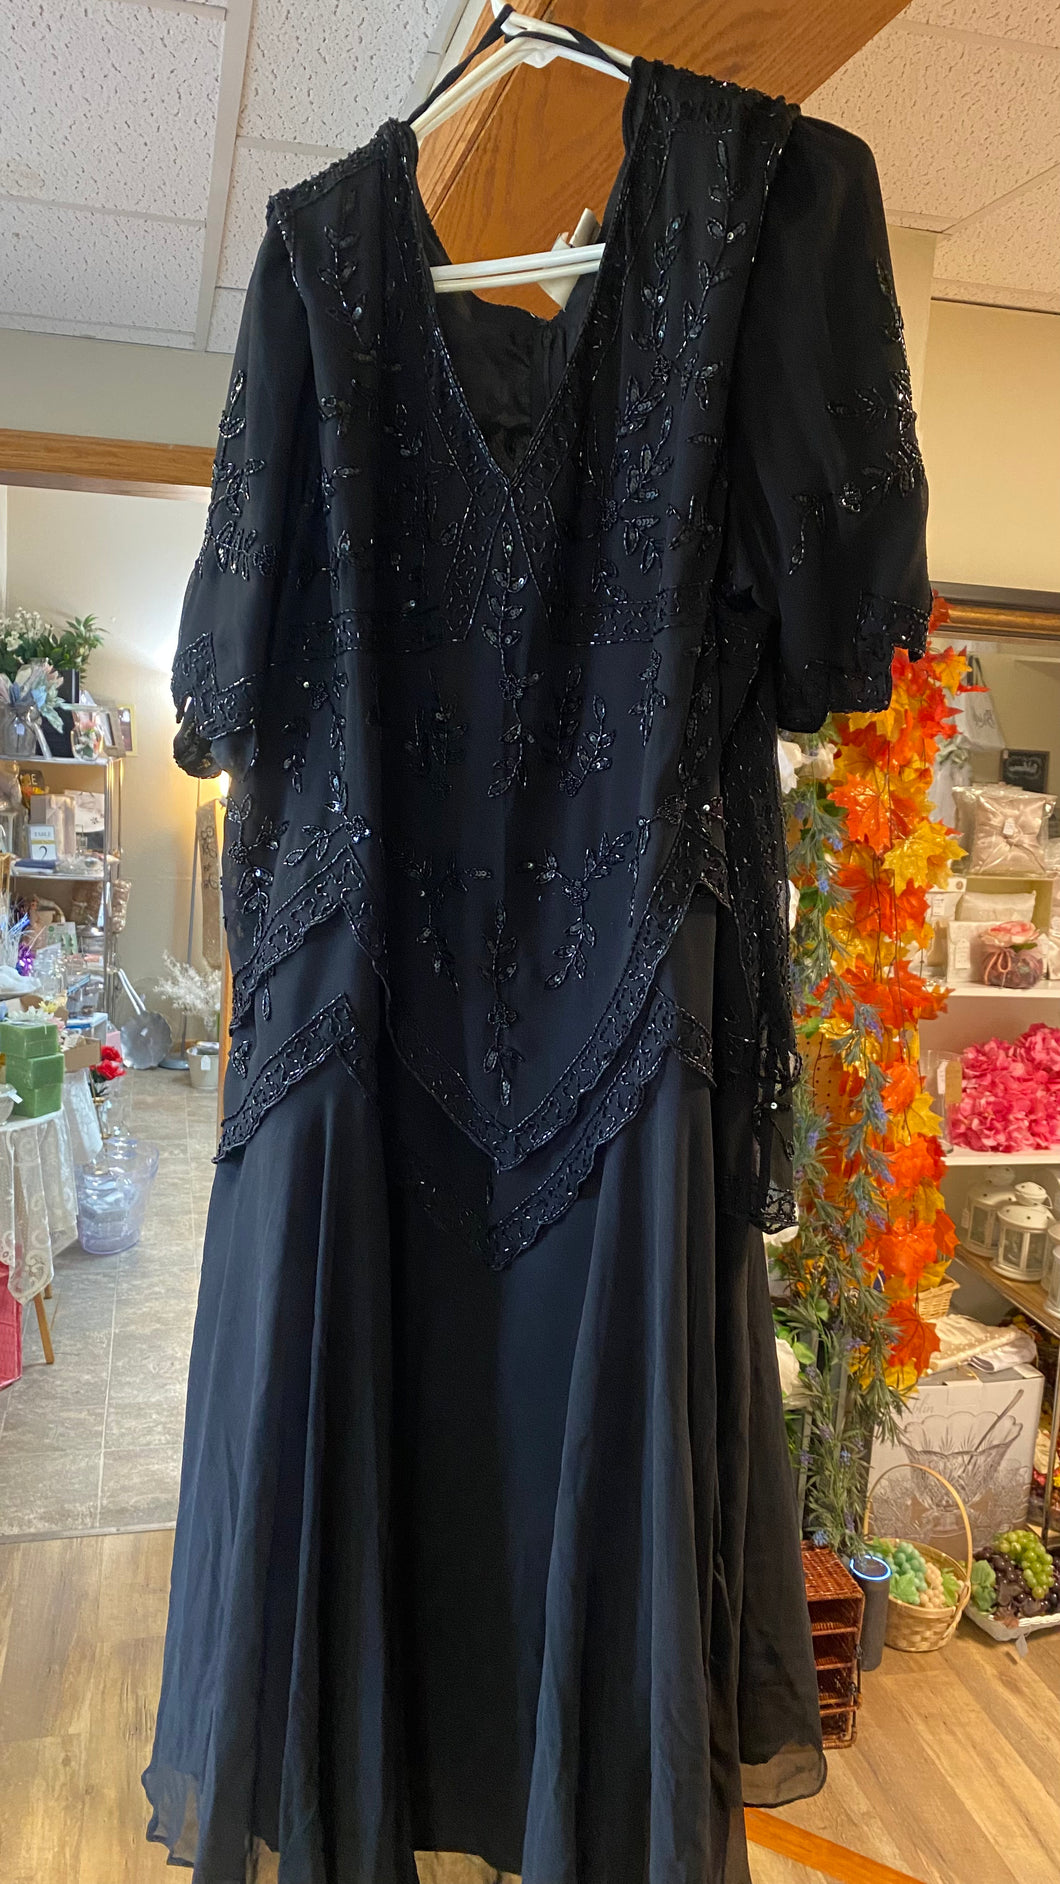 HENR300-A Sparkly Black Gown. Size 30W